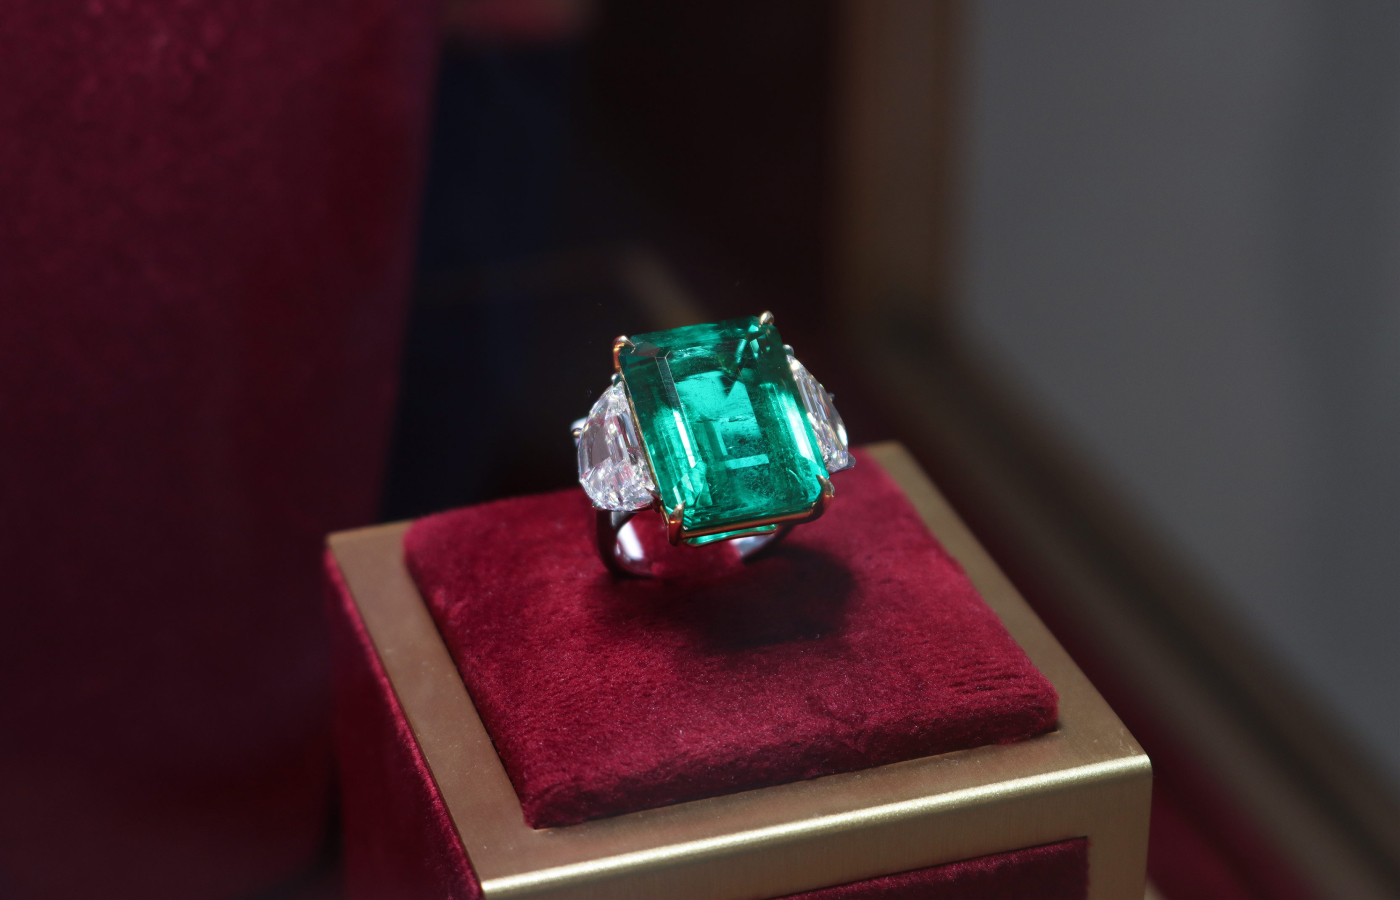 Bayco The Conquistador Emerald ring in platinum and gold set with a 23-ct unenhanced old-mine Colombian emerald and diamonds.